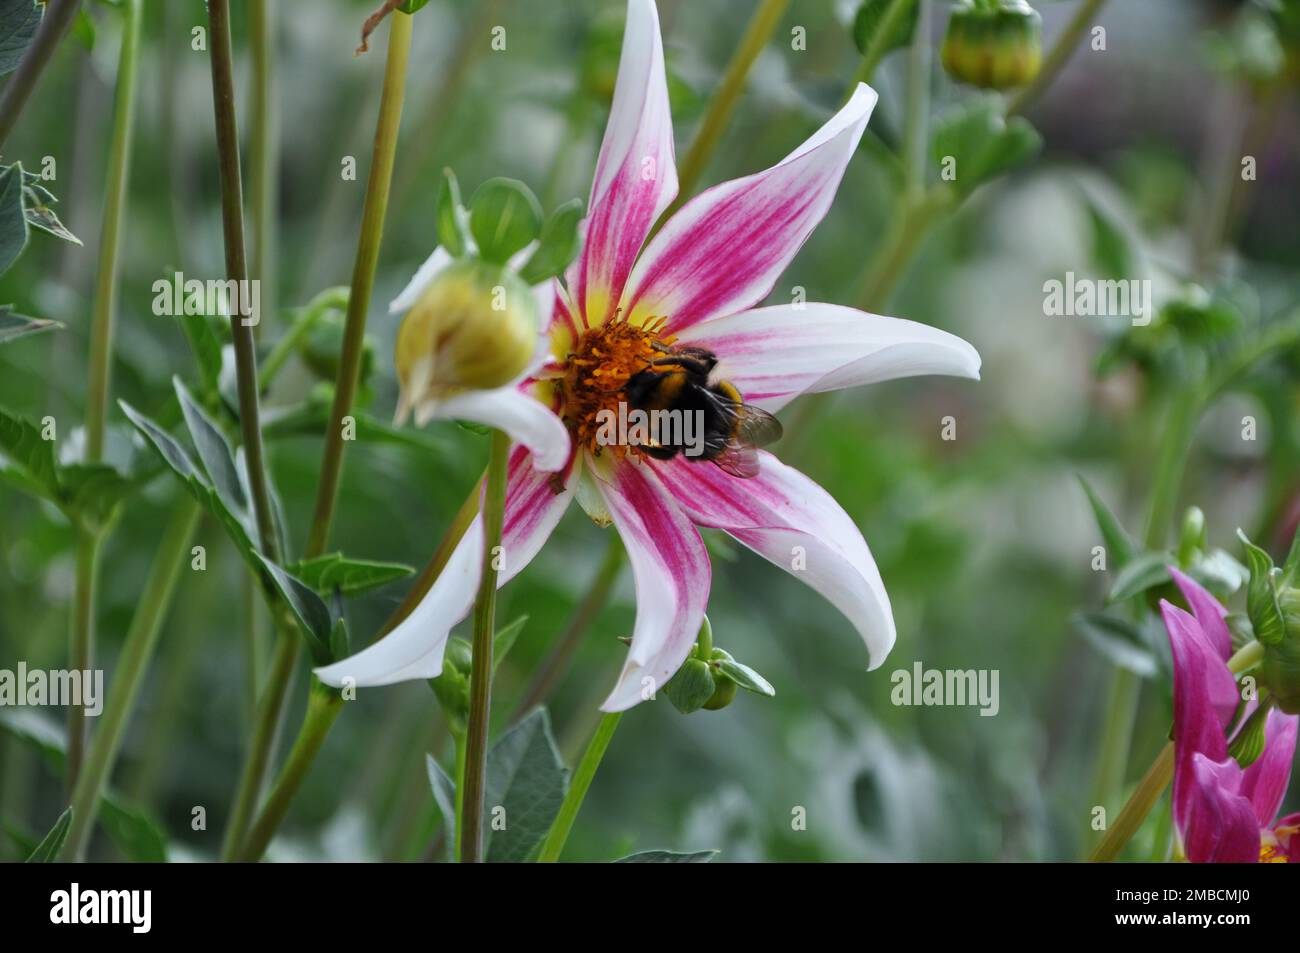 Anemone hupehensis, called «Prinz Heinrich». Flowers of the Japanese anemone, Anemone hupehensis.Bumblebee on pink floral. Stock Photo